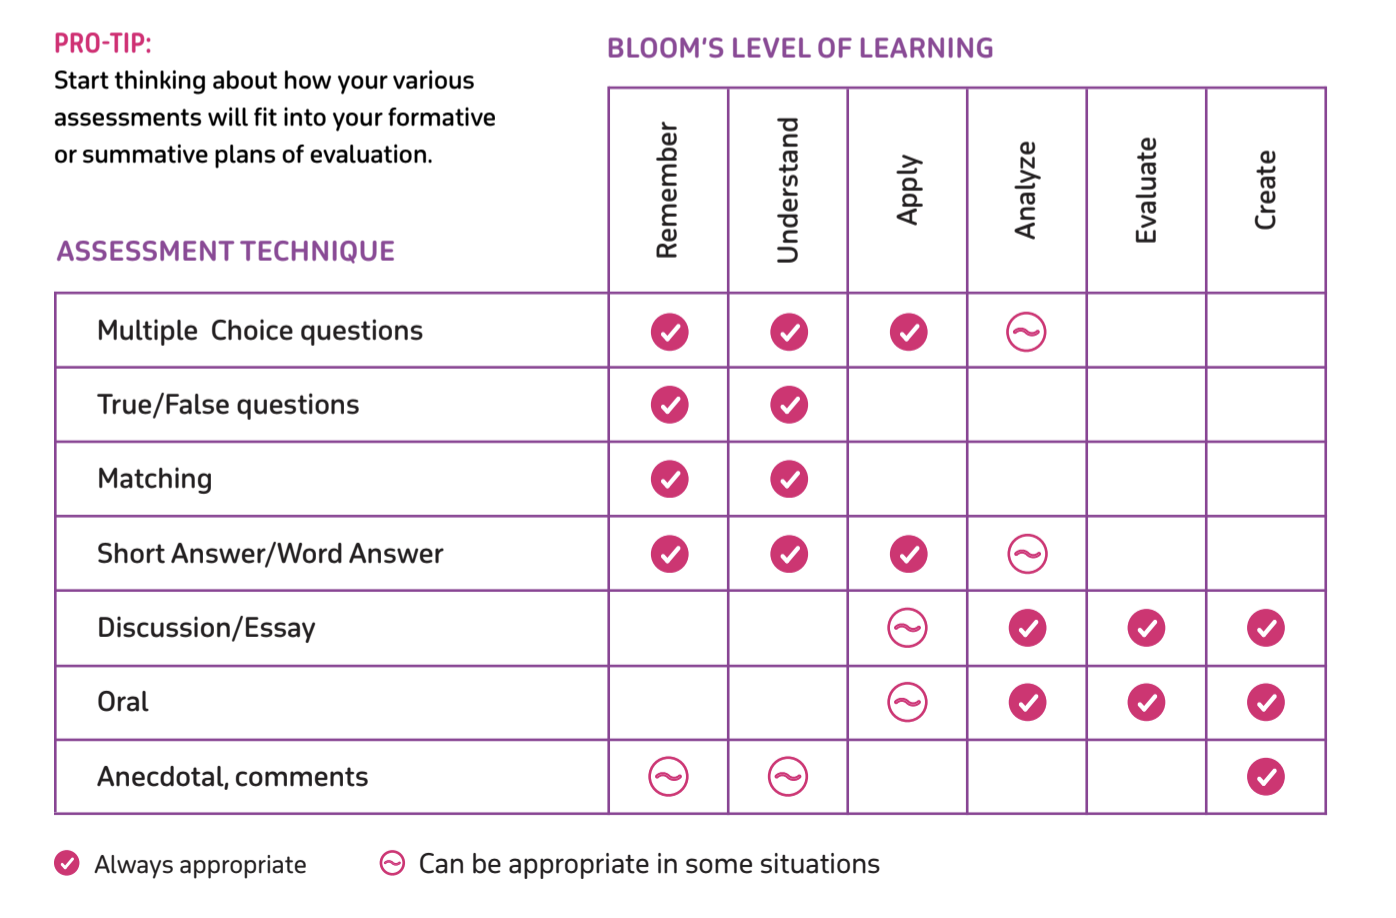 Bloom's taxonomy questions. Bloom taxonomy – steps in teaching, Learning and Assessment. Level Assessment for English Lessons. Matching activity related to Bloom's taxonomy.